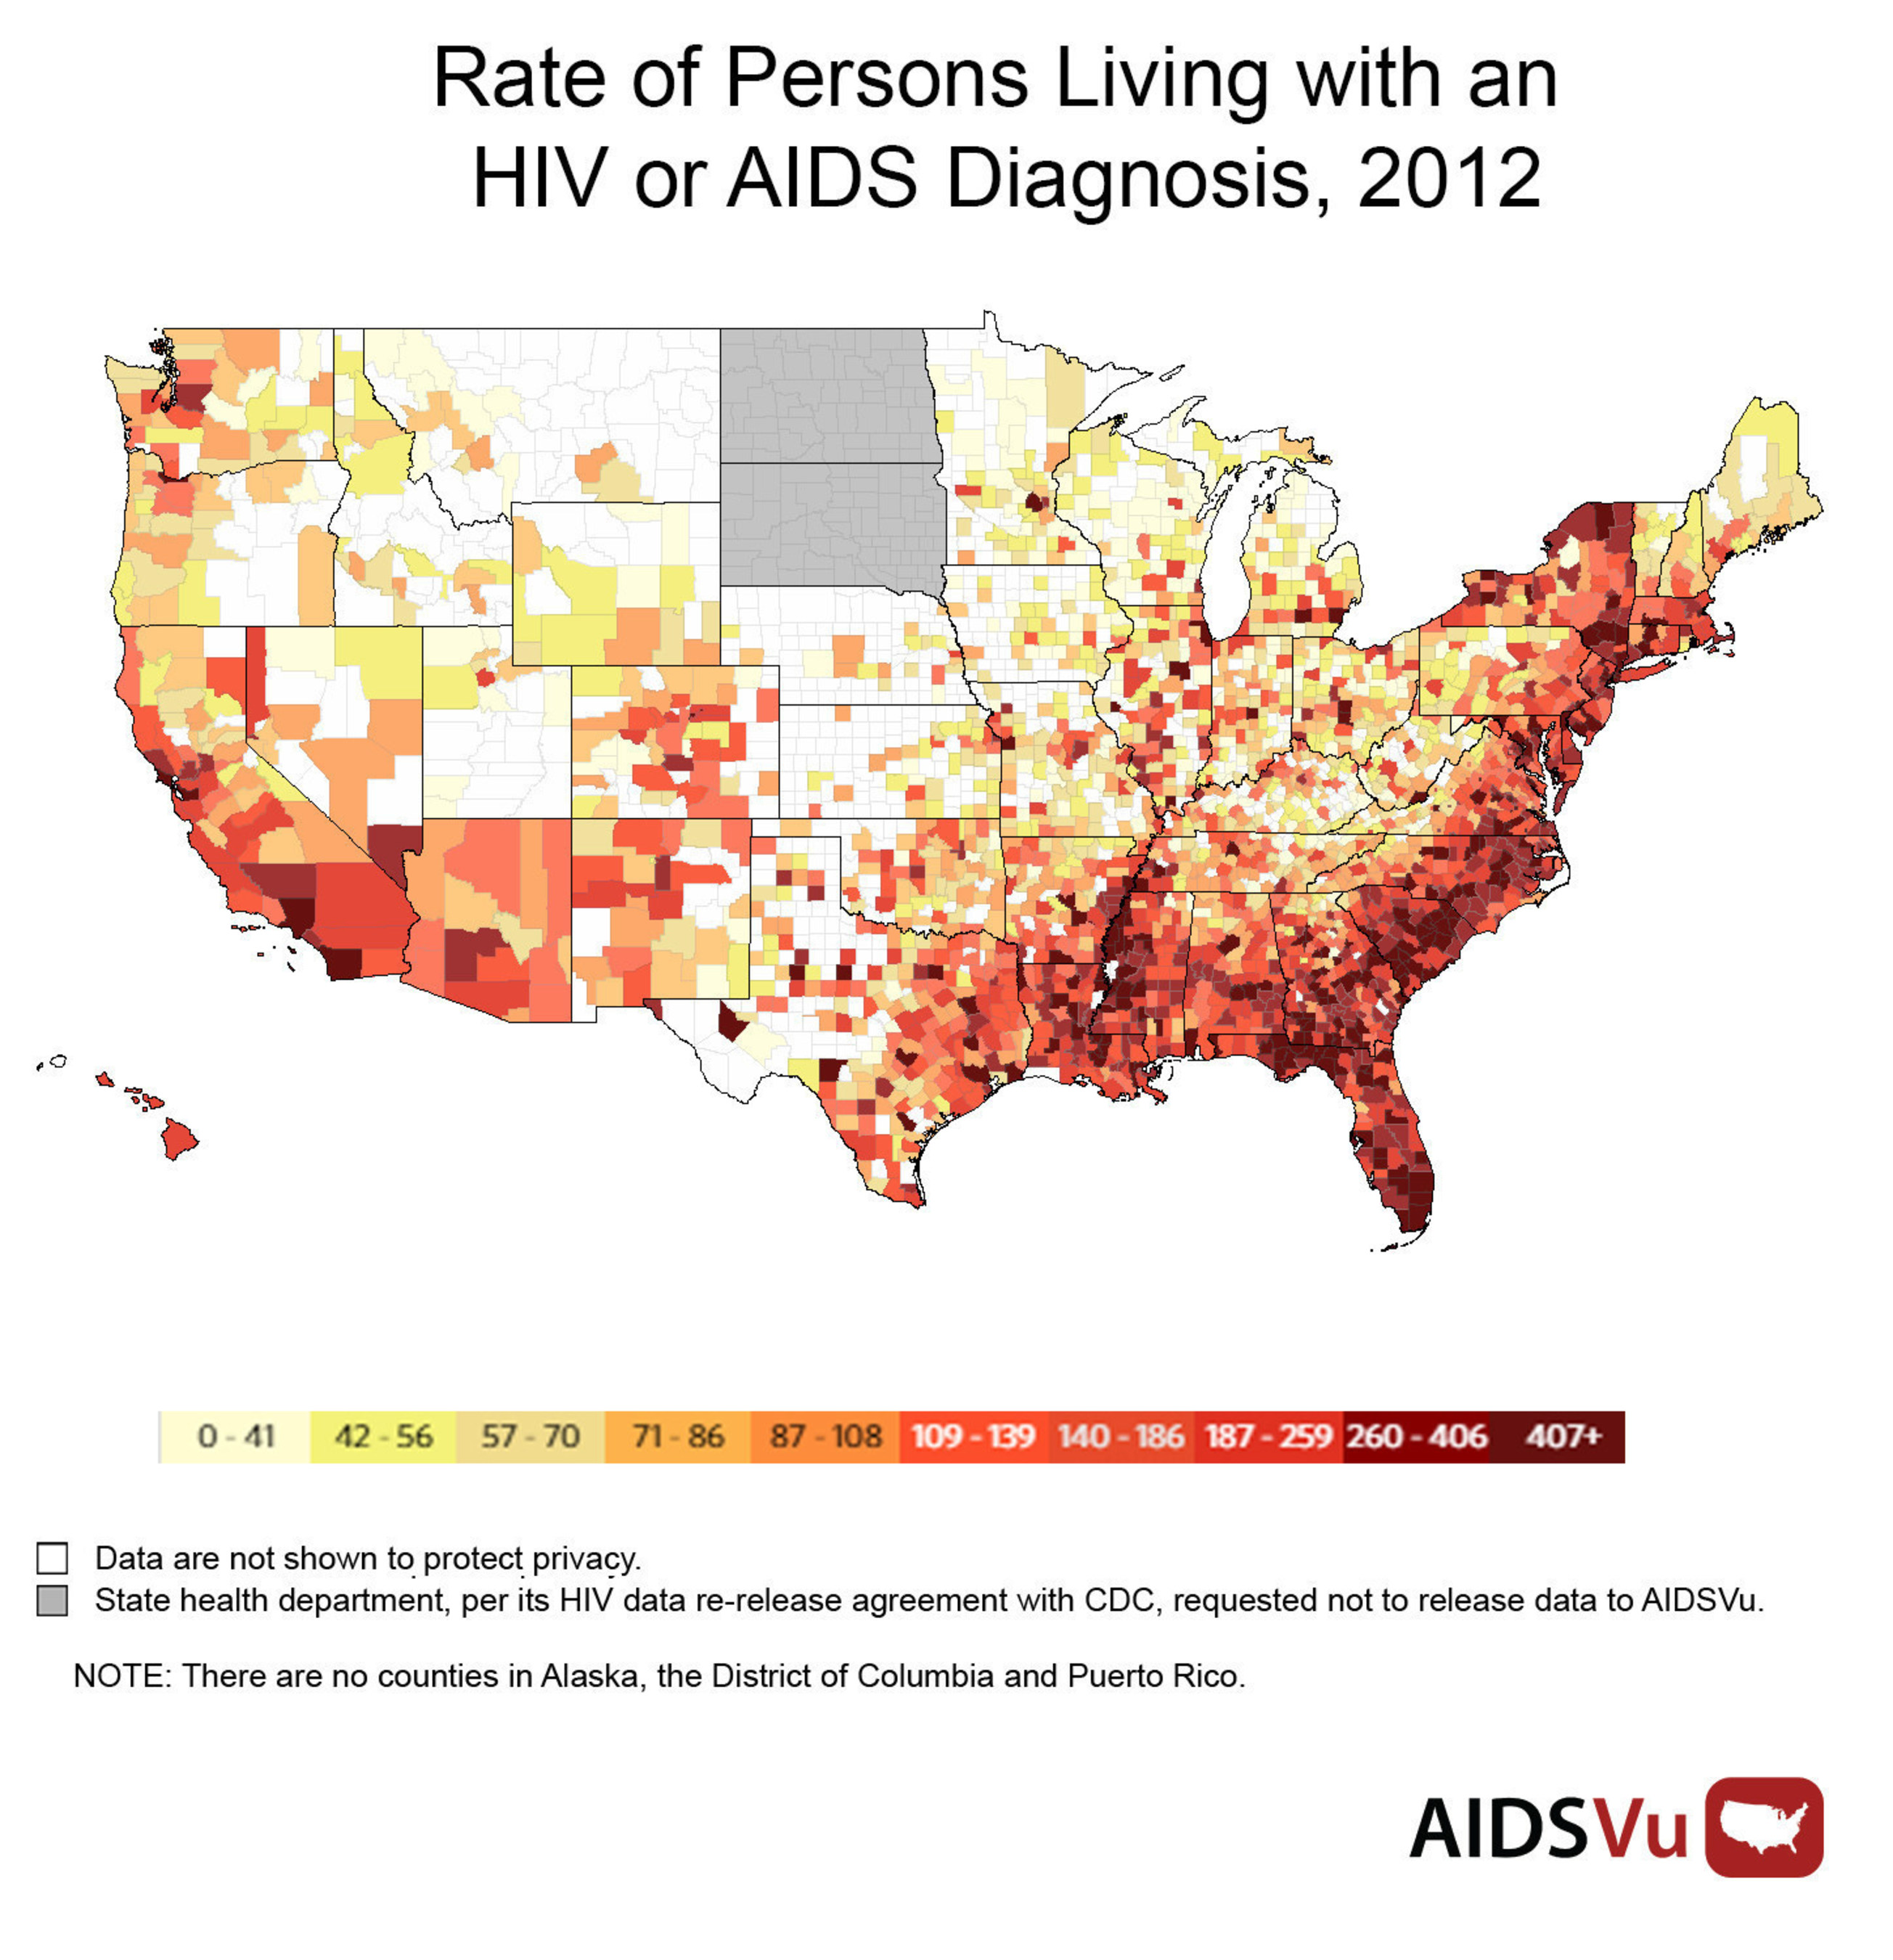 AIDSVu is a free, interactive online site that provides the most detailed publicly available view of HIV in the United States. It displays HIV prevalence and new diagnosis data at national, state, and local levels, and by different demographics, including age, race, and sex. www.AIDSVu.org